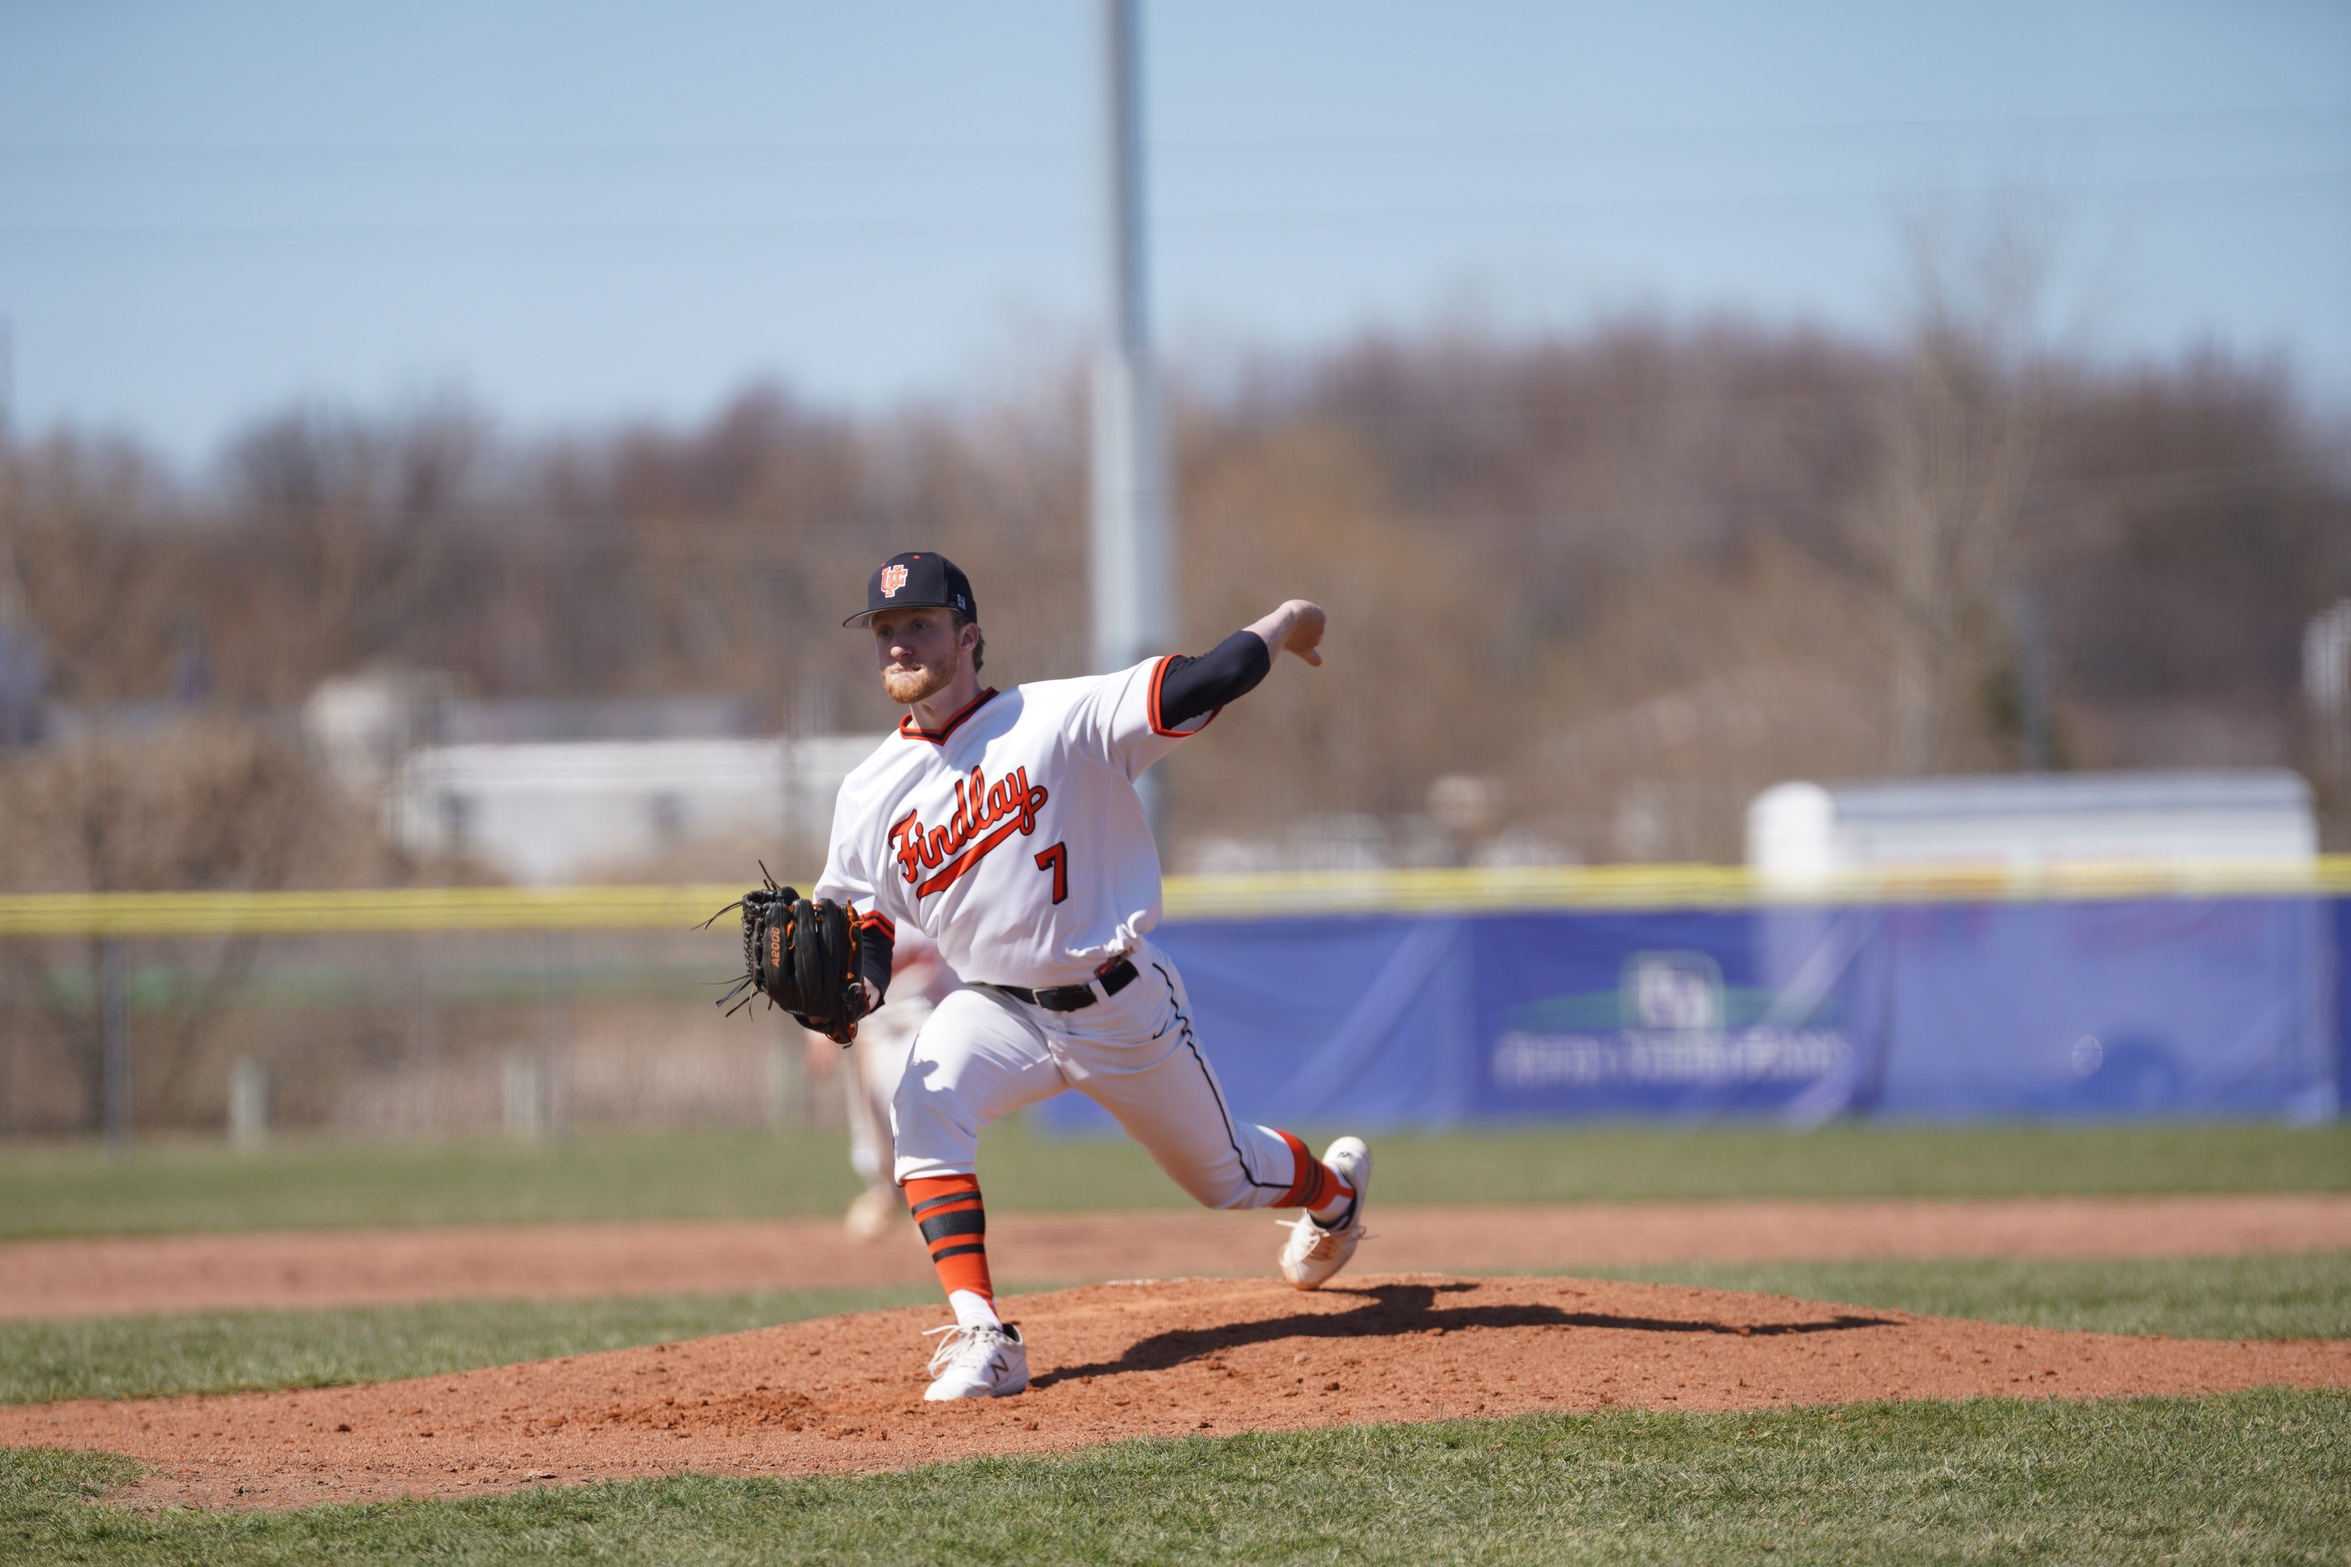 player in white pitching